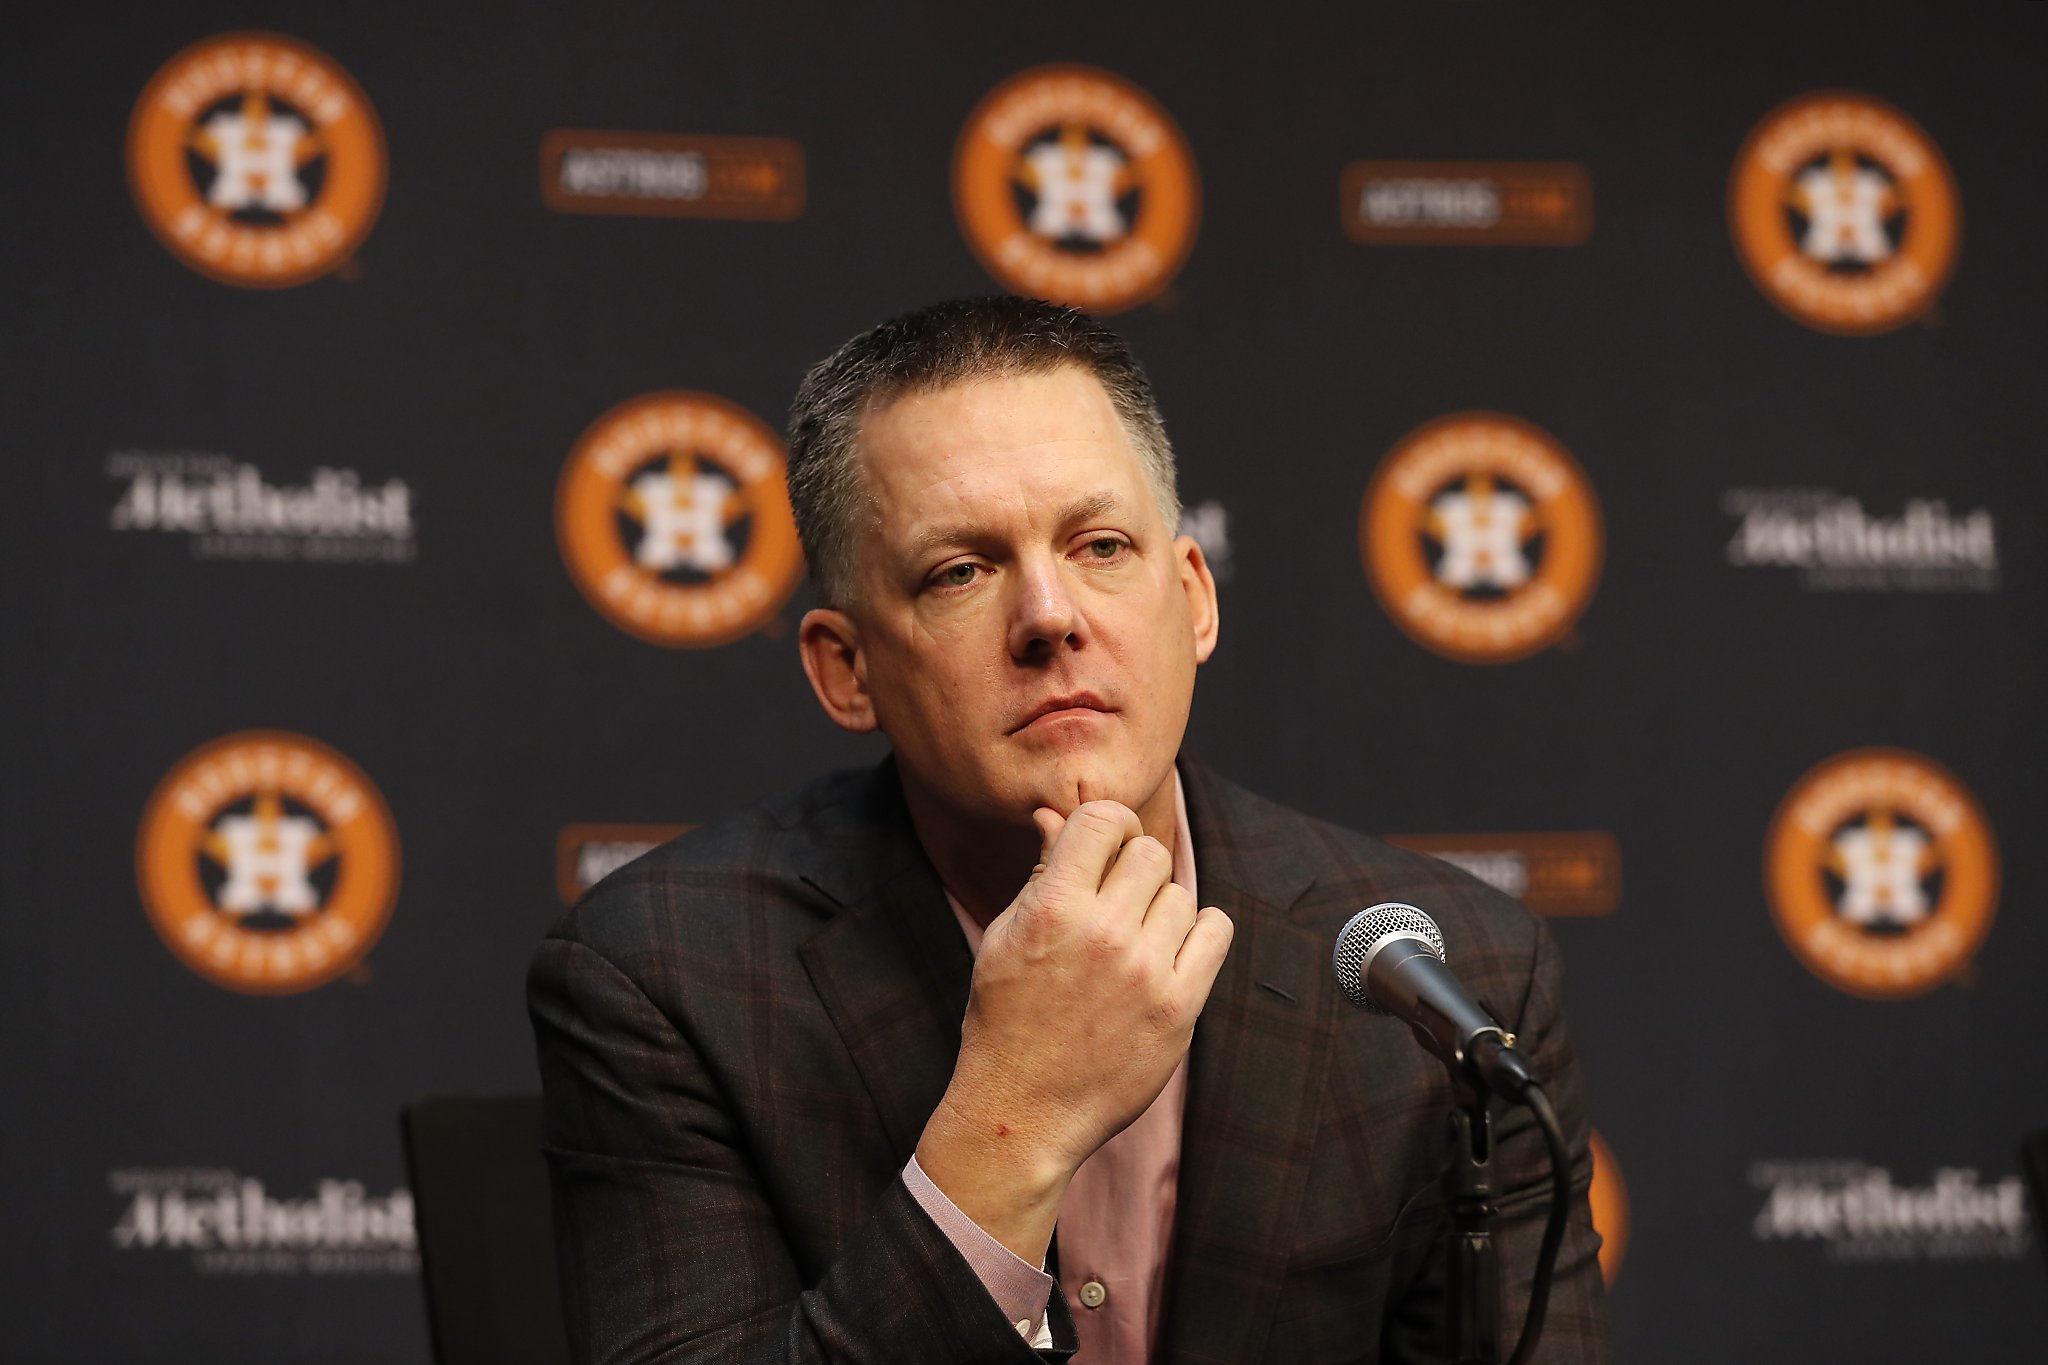 Will Erickson, 7, never thought Houston Astros GM Jeff Luhnow would reply  to letter 'because he's busy' - ESPN